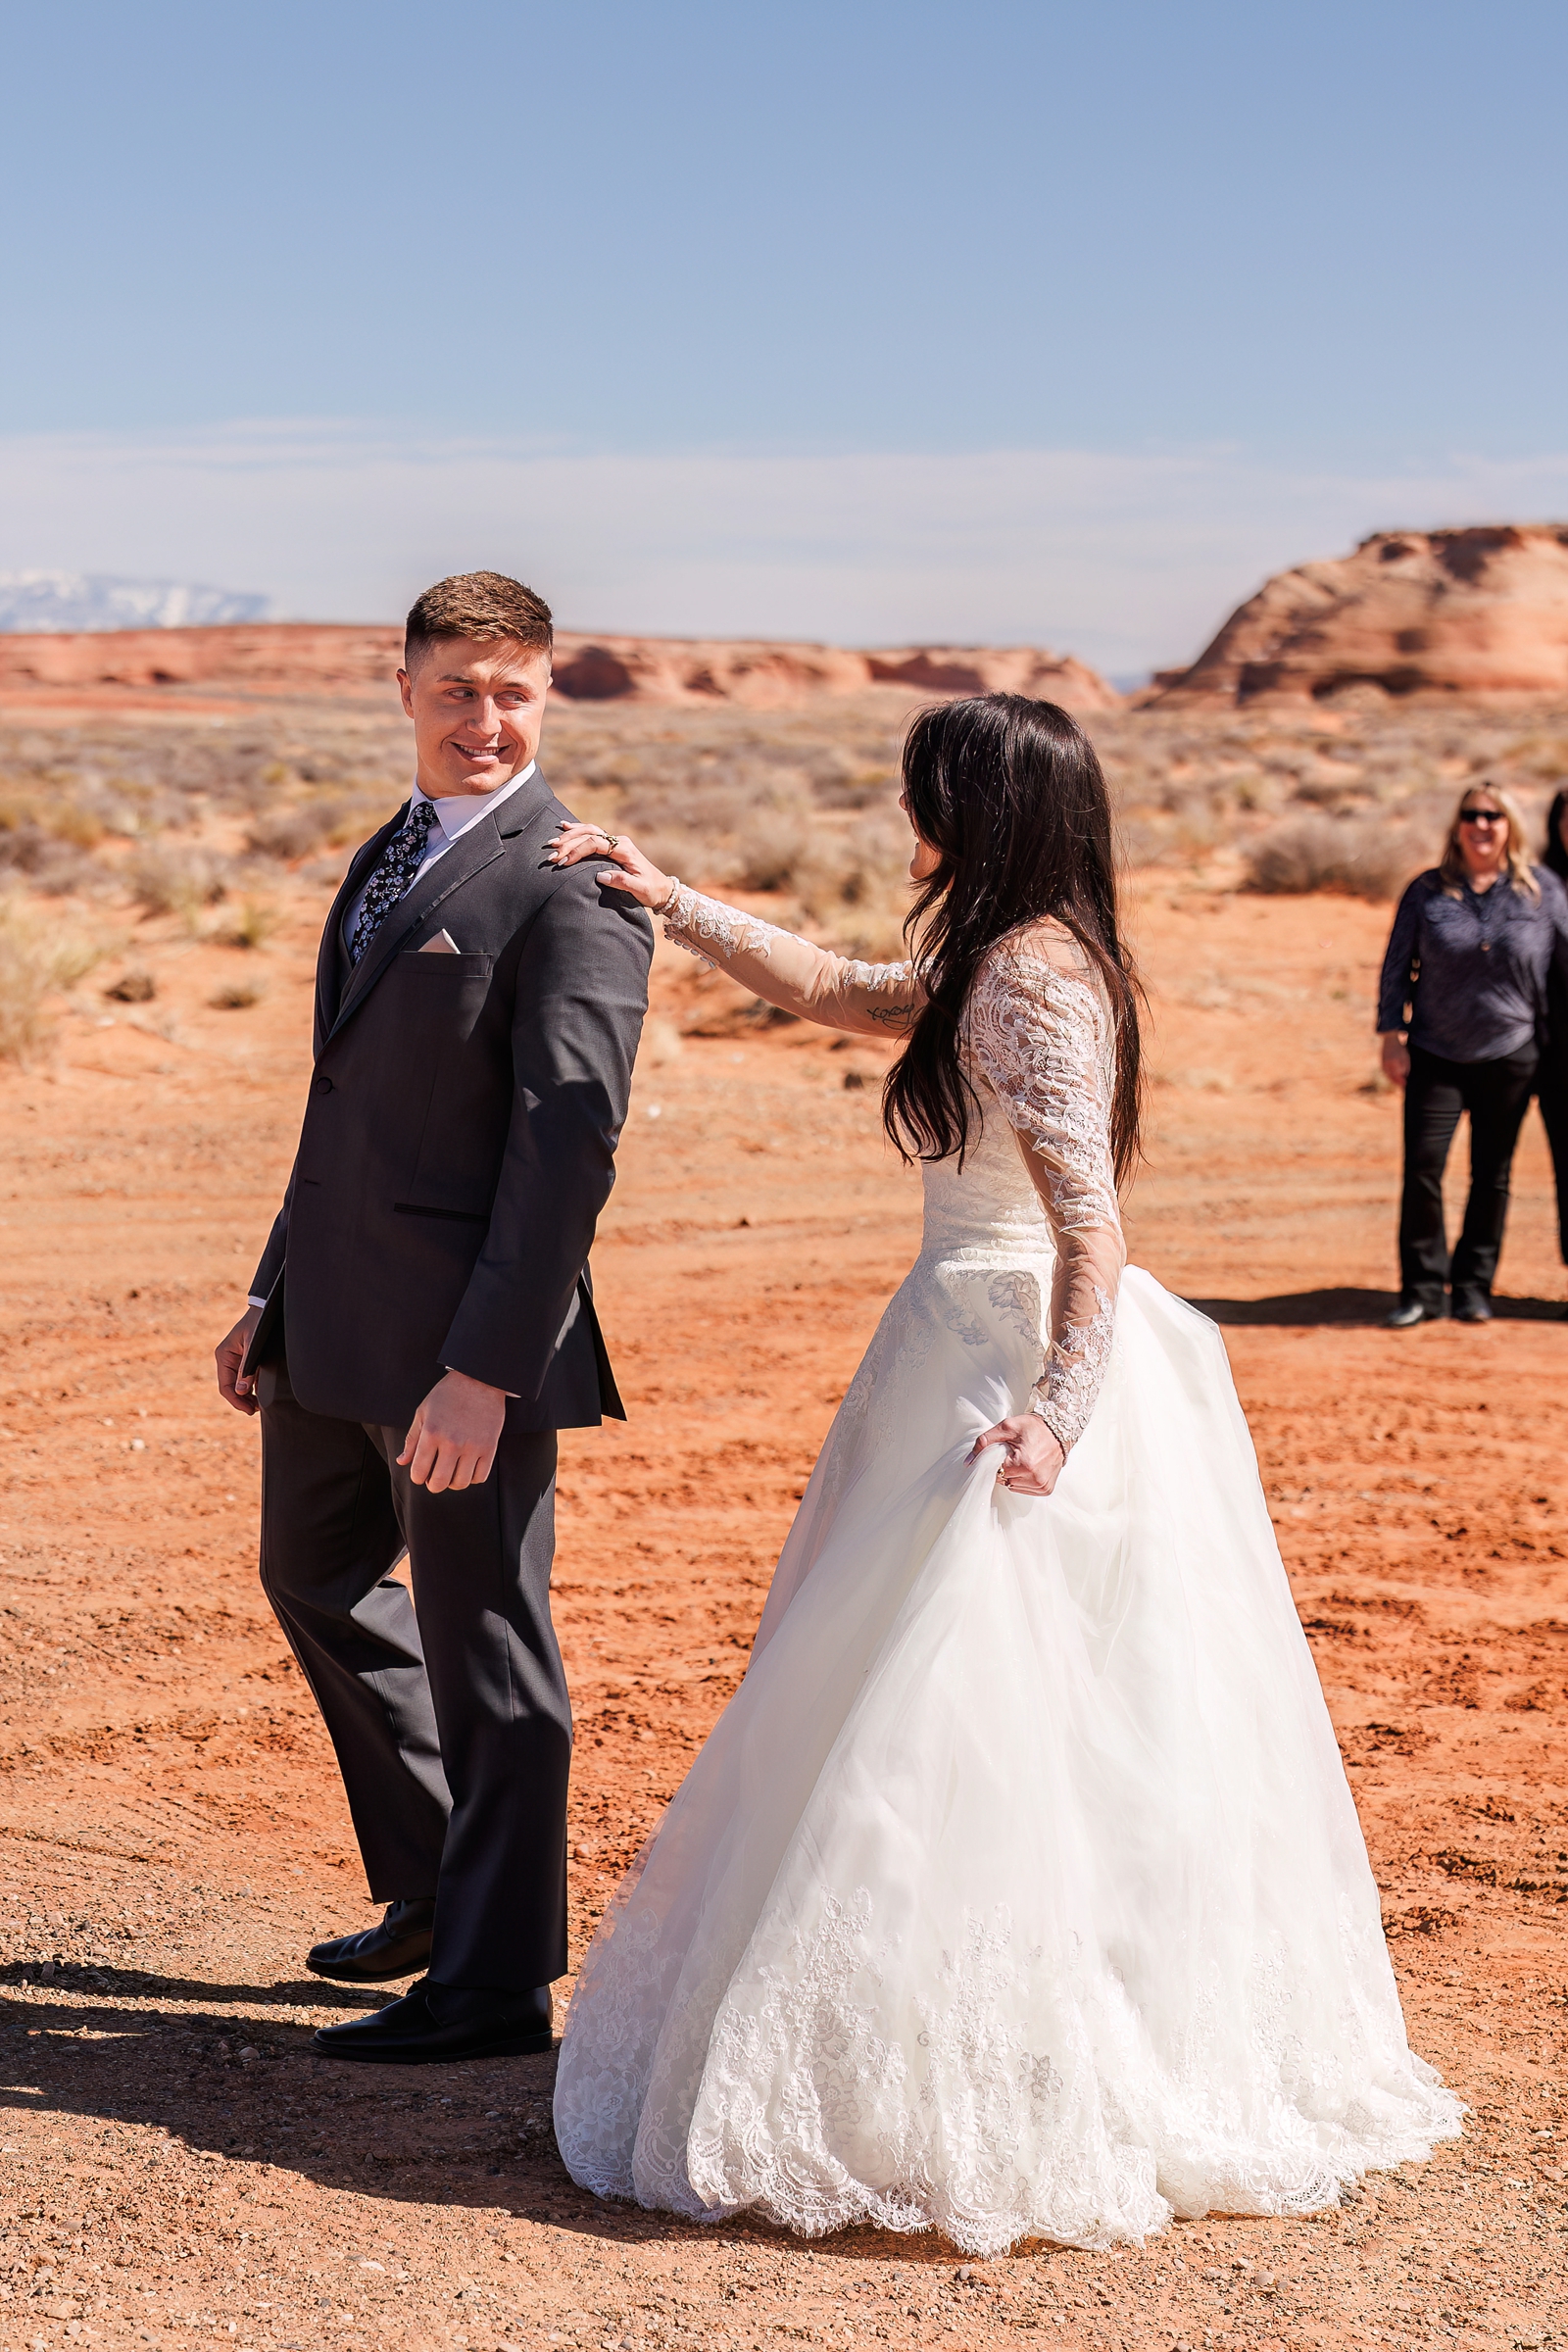 The Bride and Groom see each other for the first time during their adventurous elopement in the Utah wilderness